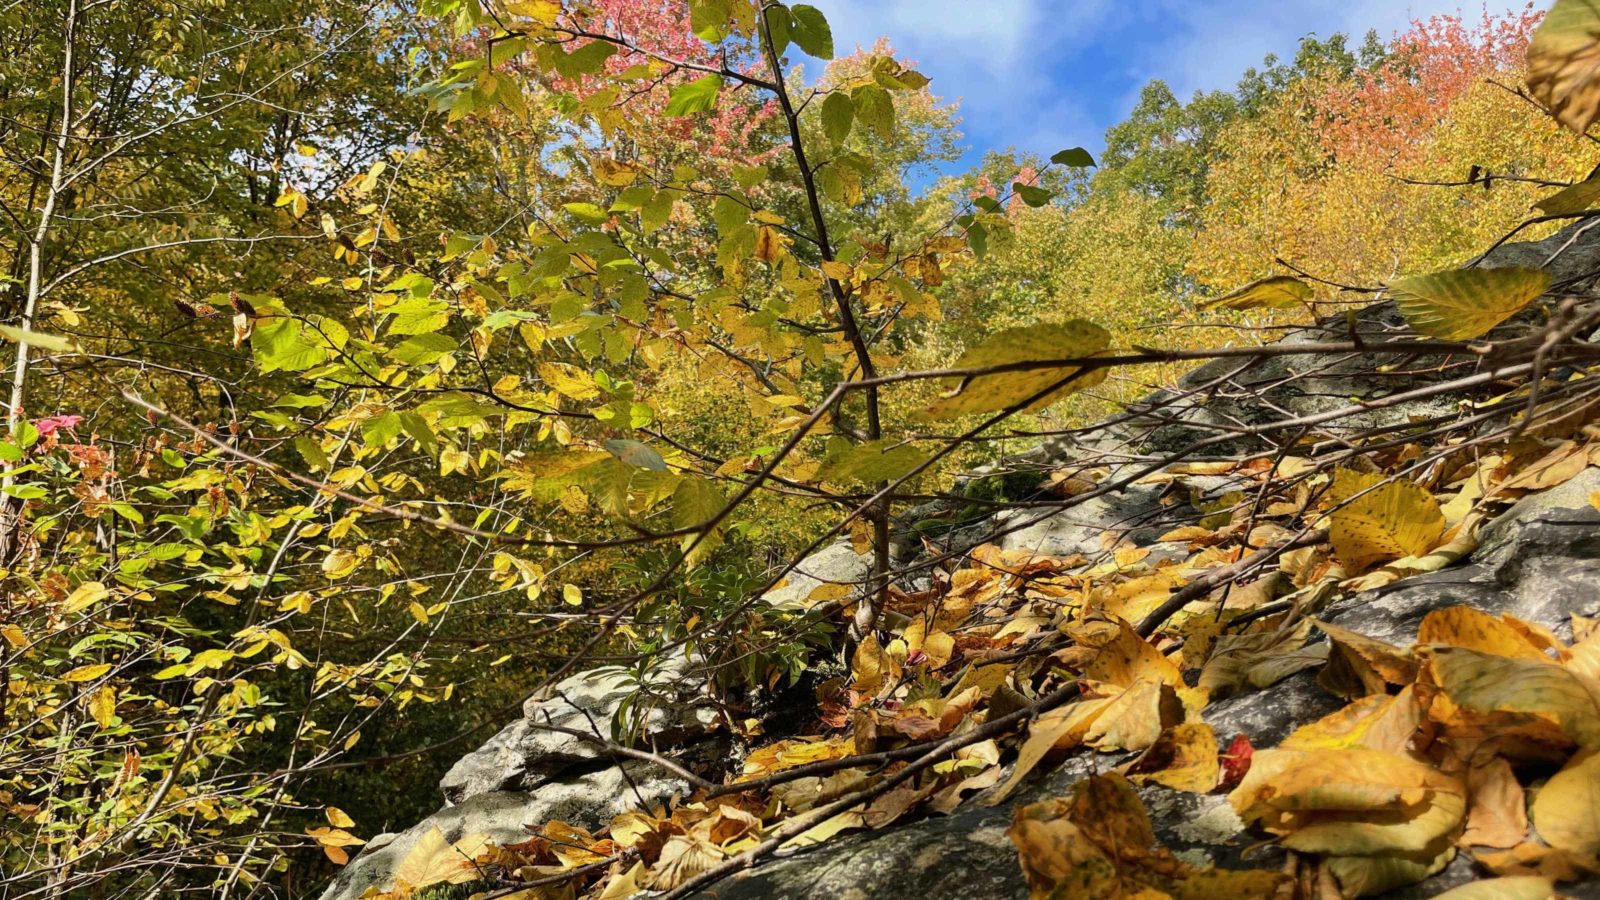 Maple and birch turn golden along an open rock face on the '98 Trail near the Chestnut trail.